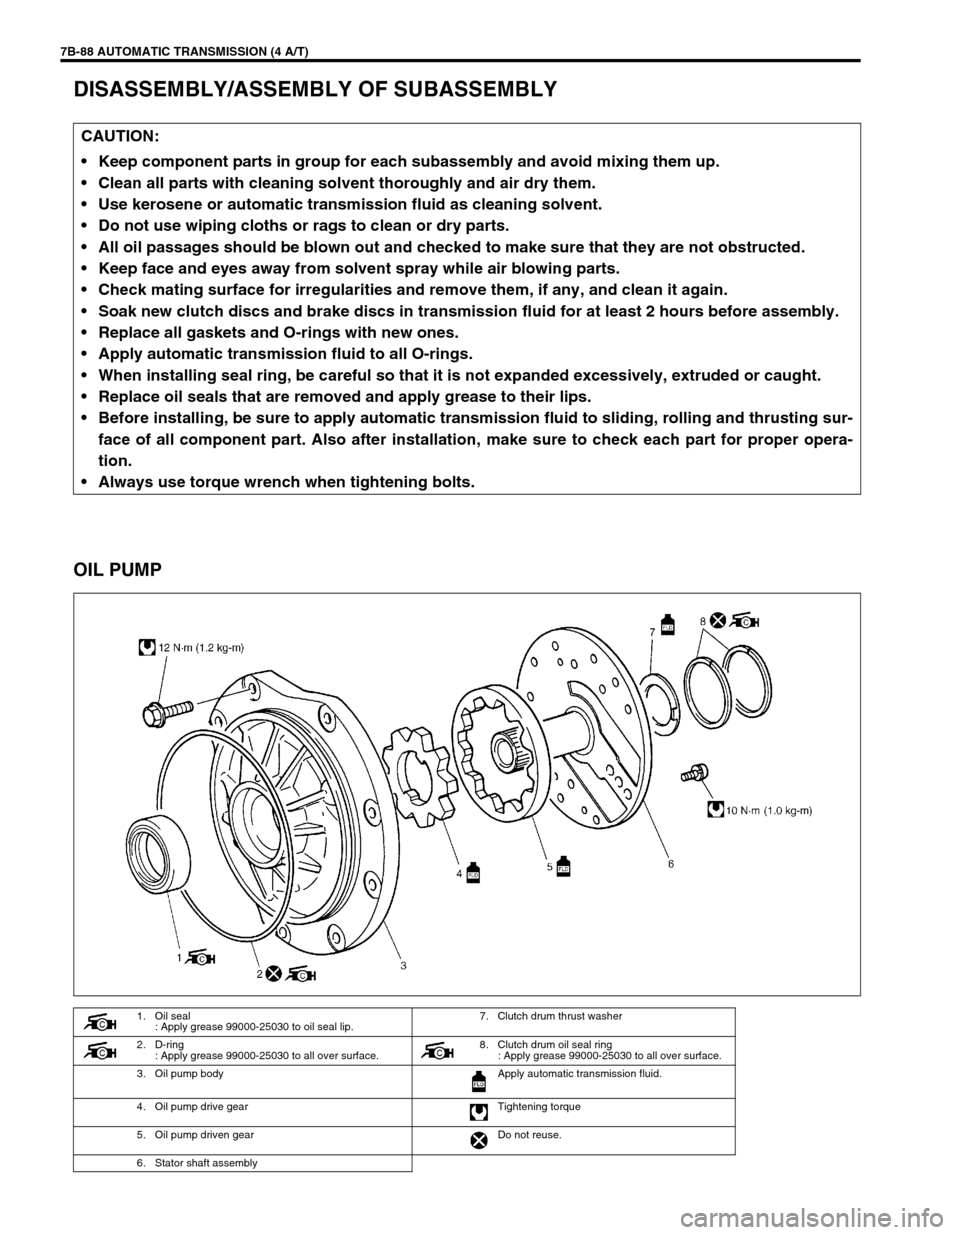 SUZUKI SWIFT 2000 1.G Transmission Service Workshop Manual 7B-88 AUTOMATIC TRANSMISSION (4 A/T)
DISASSEMBLY/ASSEMBLY OF SUBASSEMBLY
OIL PUMP
CAUTION:
 Keep component parts in group for each subassembly and avoid mixing them up.
 Clean all parts with cleanin